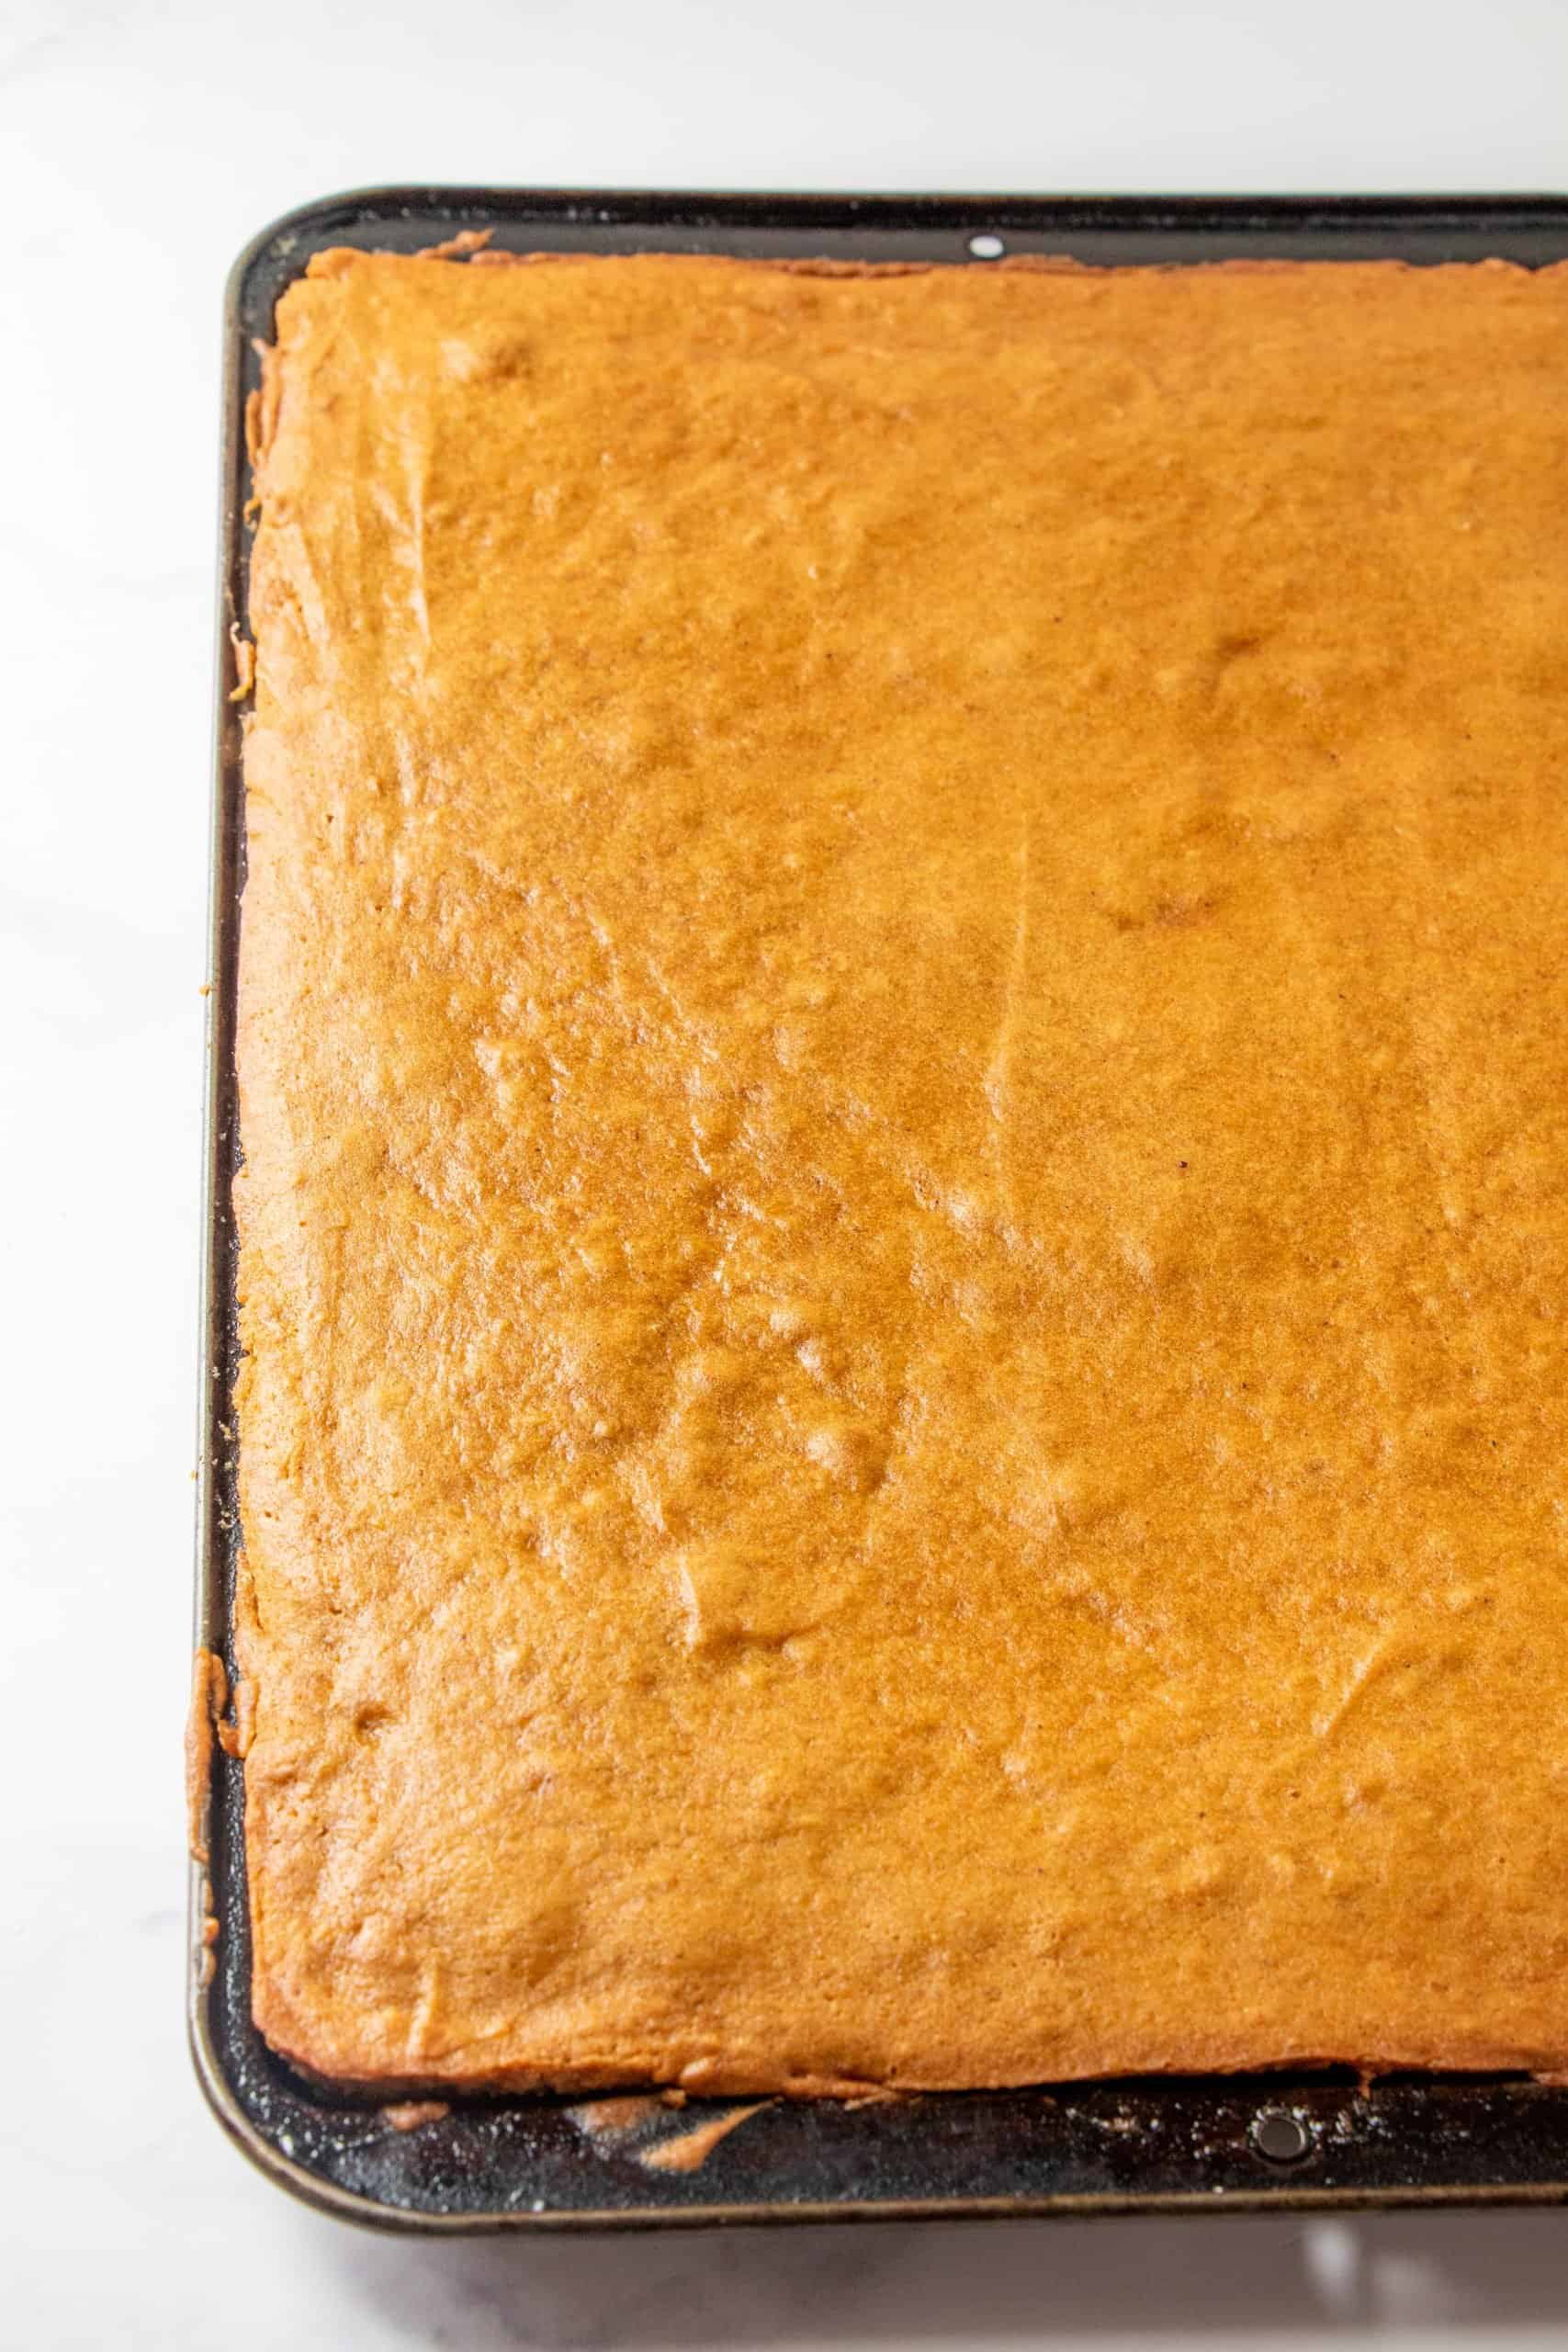 pumpkin cake bar after being fully cooked and pictured in a metal baking pan.